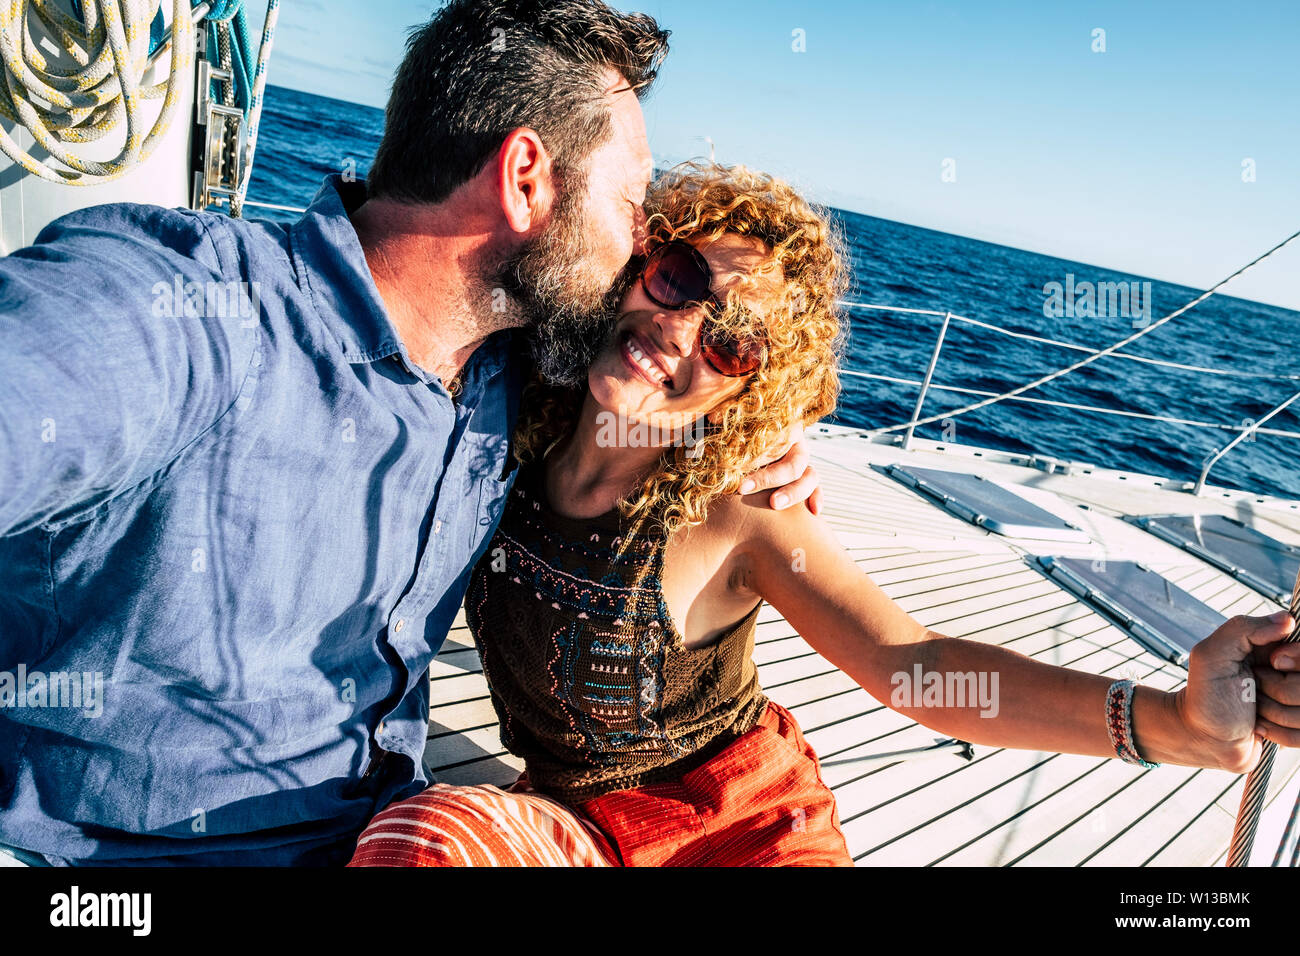 Happy tourist couple of traveler people in love enjoying the sail boat trip together having fun and smiling - cheerful adult man and woman under the s Stock Photo